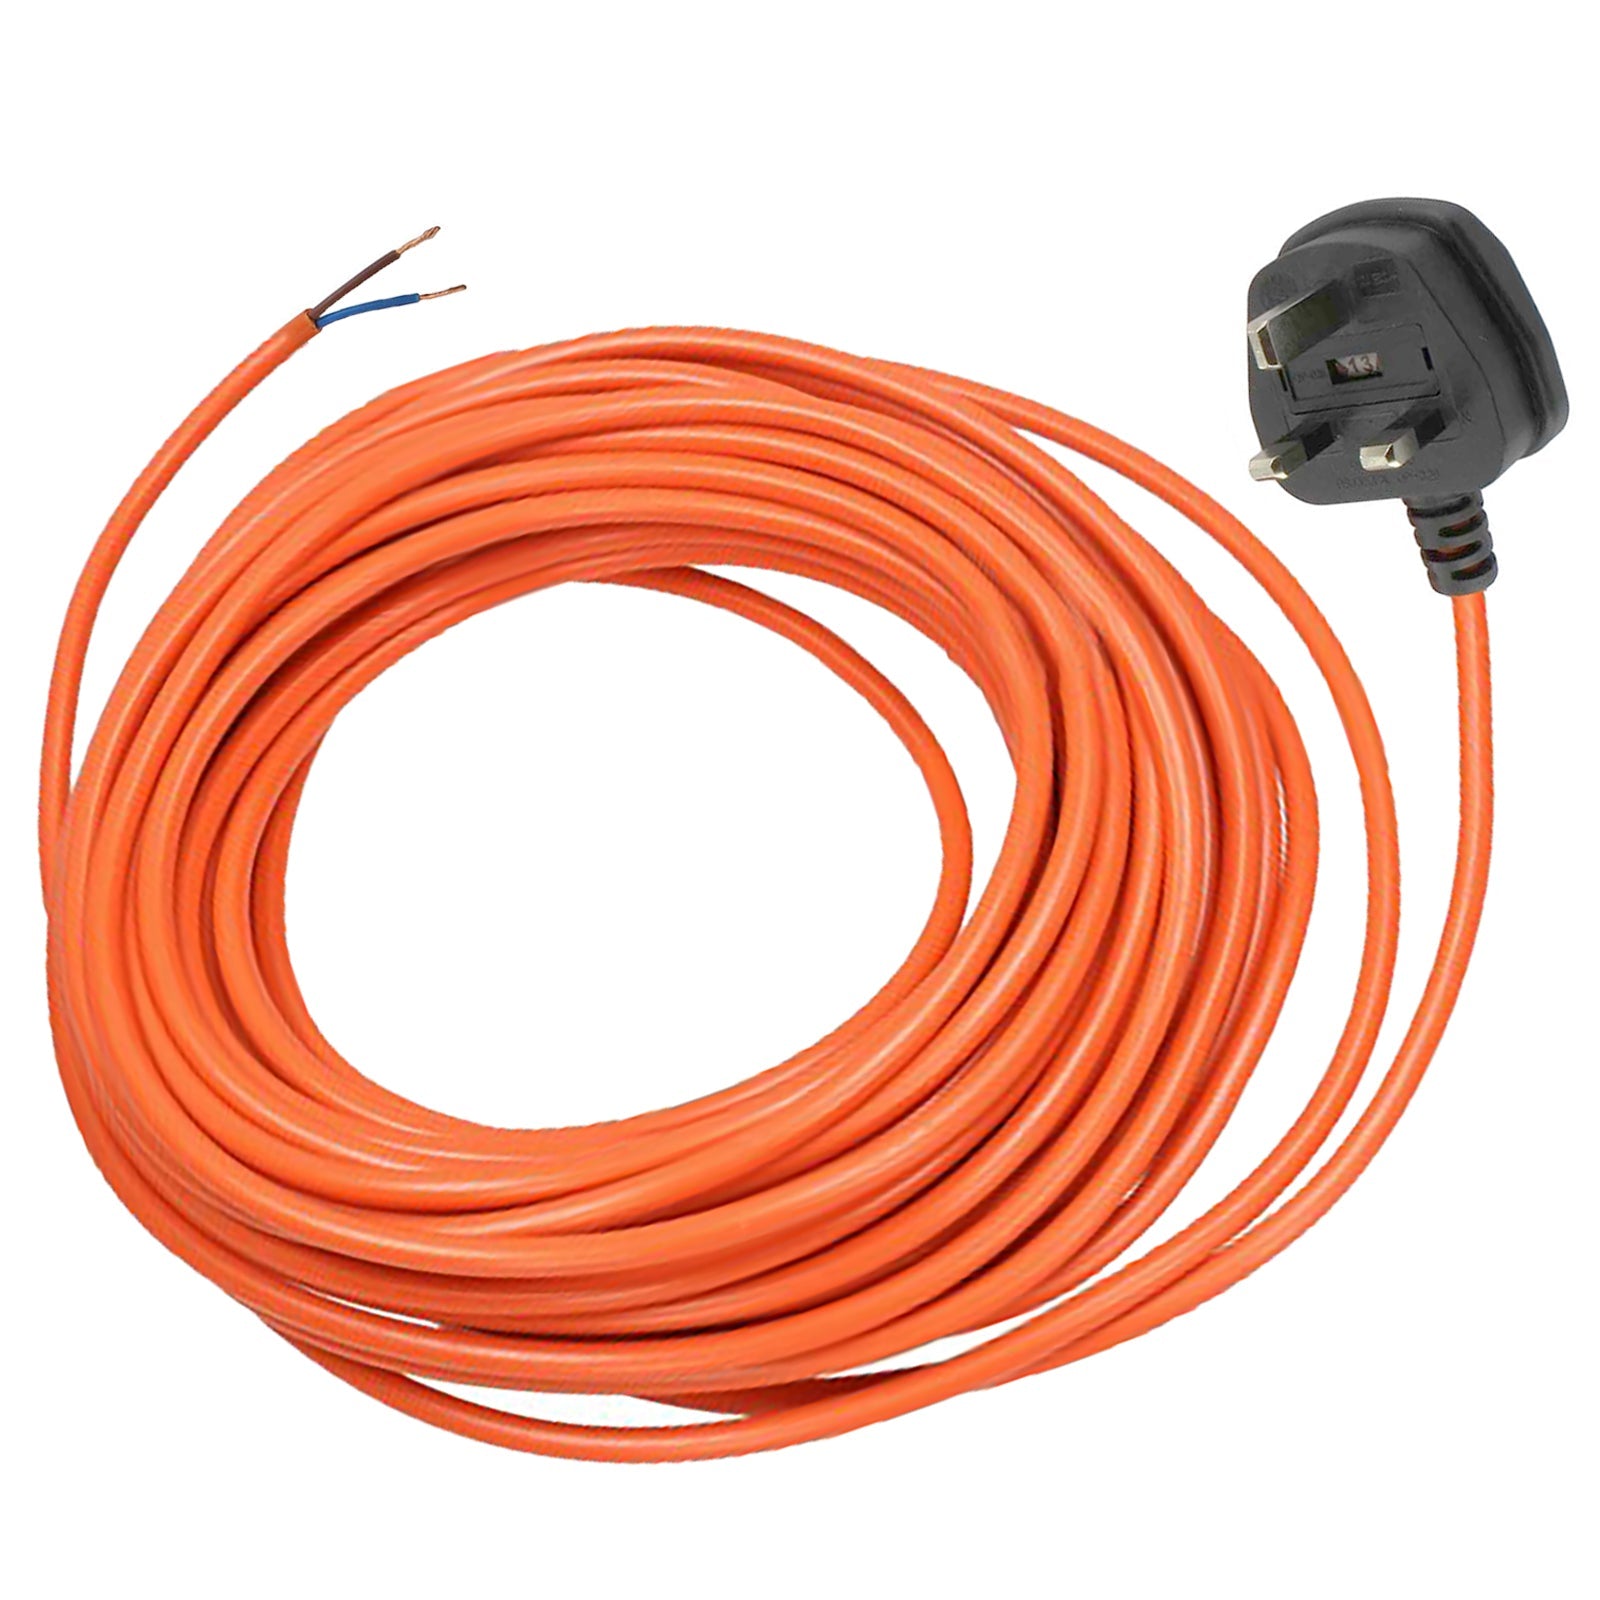 12m Power Cable For Flymo Turbo Lite 330 Lawnmower Extra Long Lead with Plug